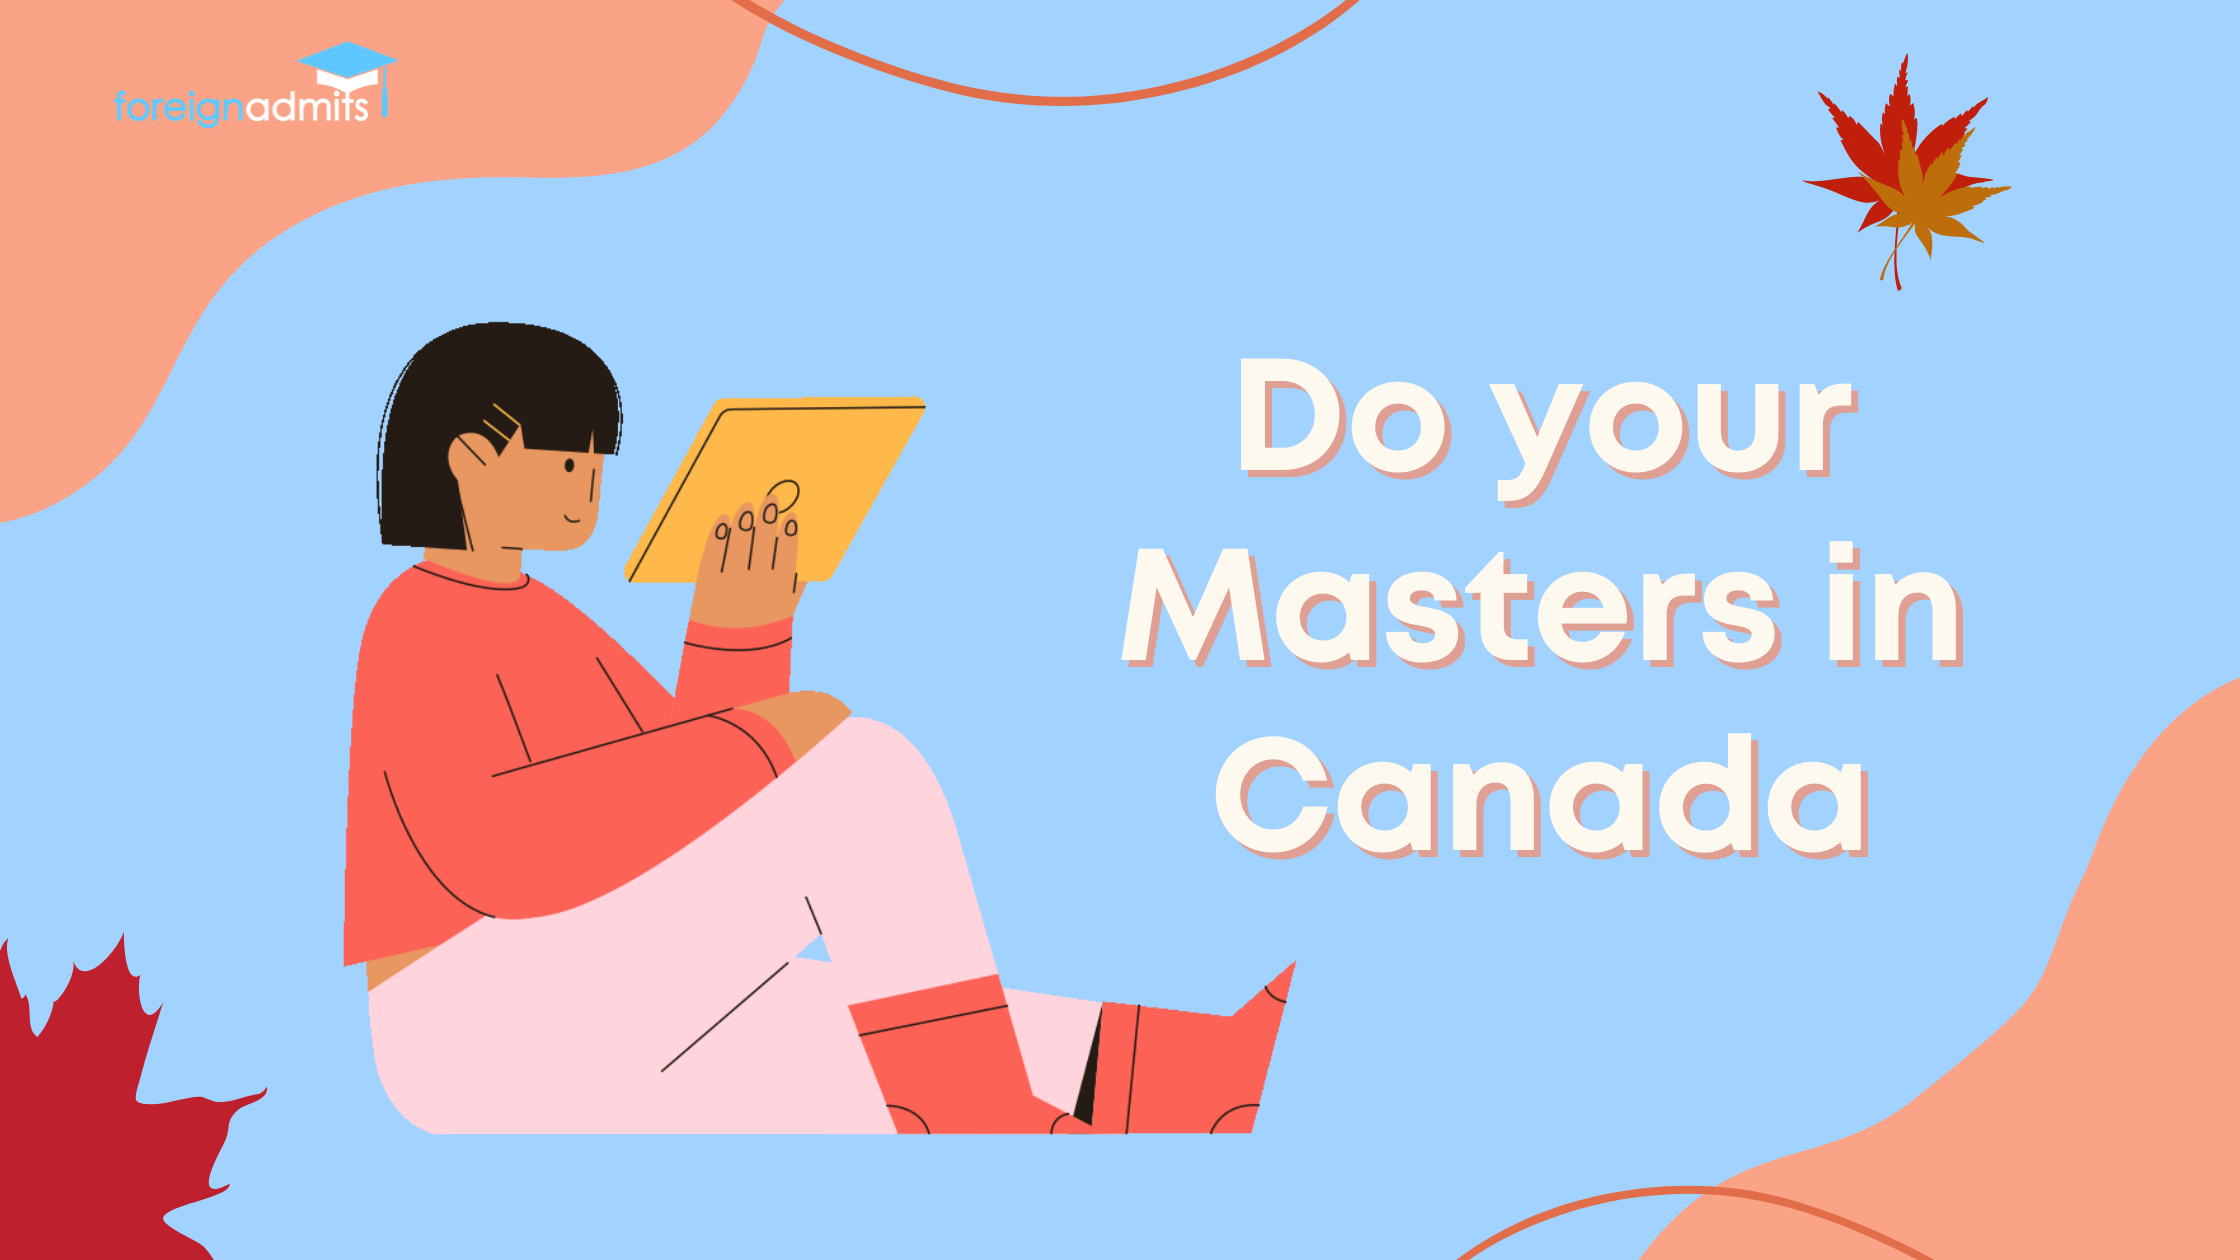 Want to Study in Canada for Masters? Read on